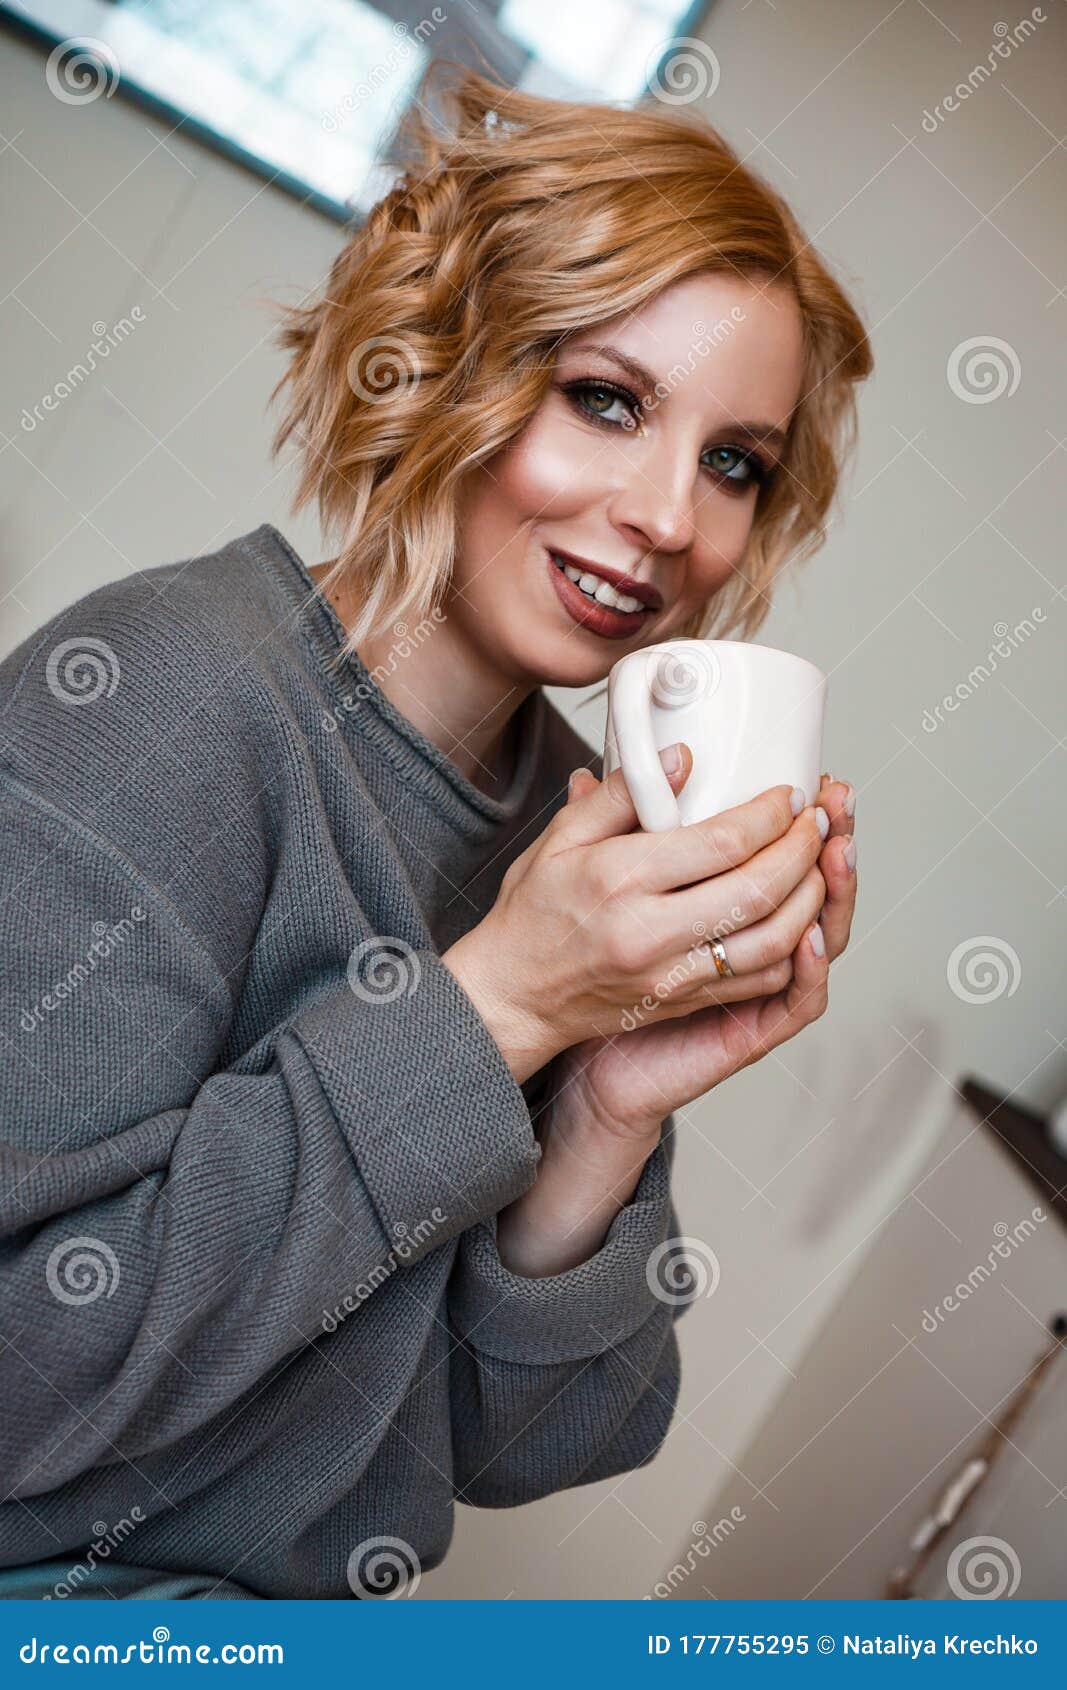 Smiling Blonde Drinking Cappuccino, Holding Coffee Cup Stock Image ...